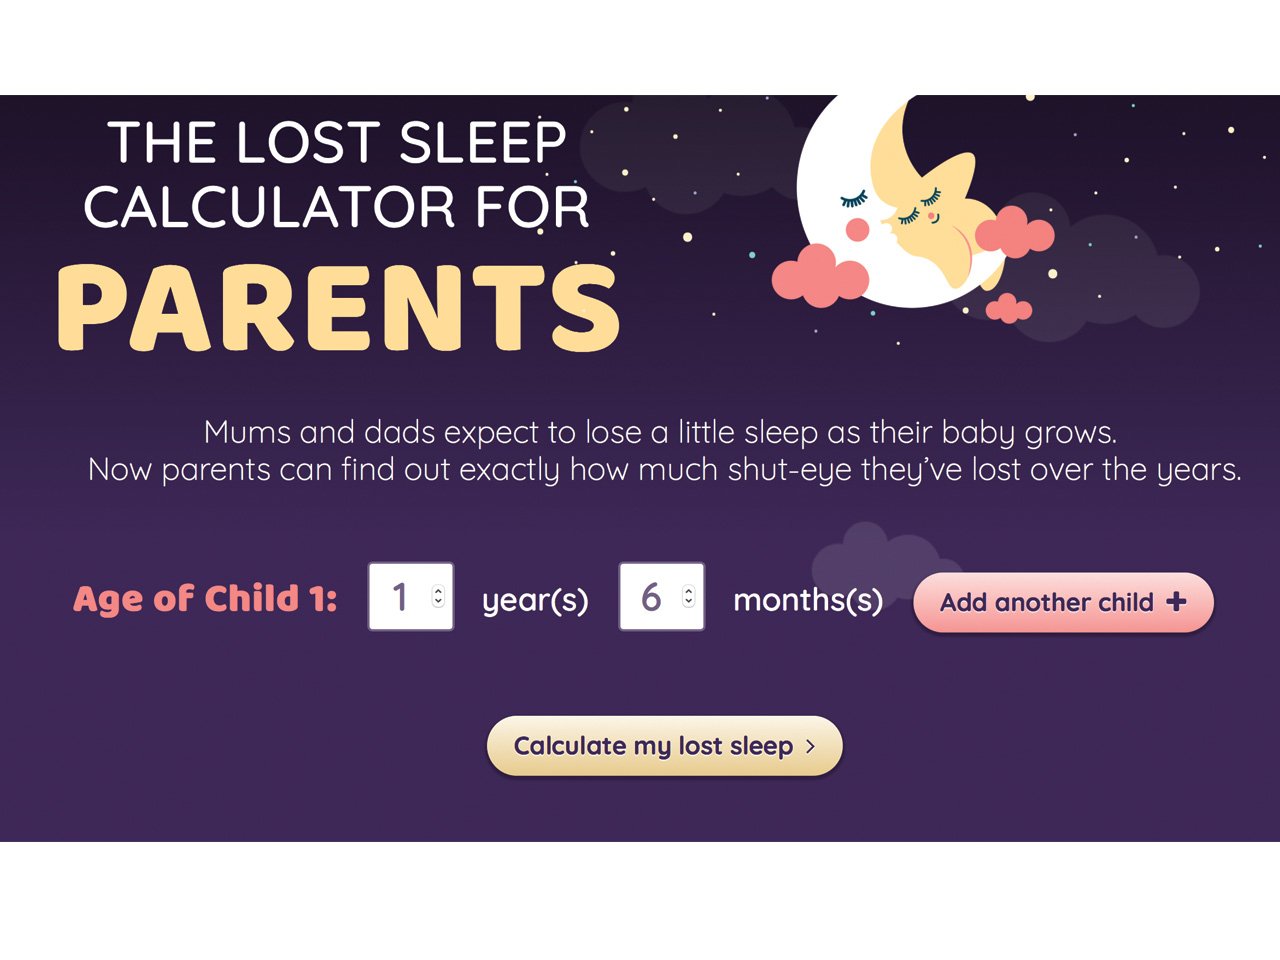 calculator that shows how much sleep you've lost as a parent based on your child's age